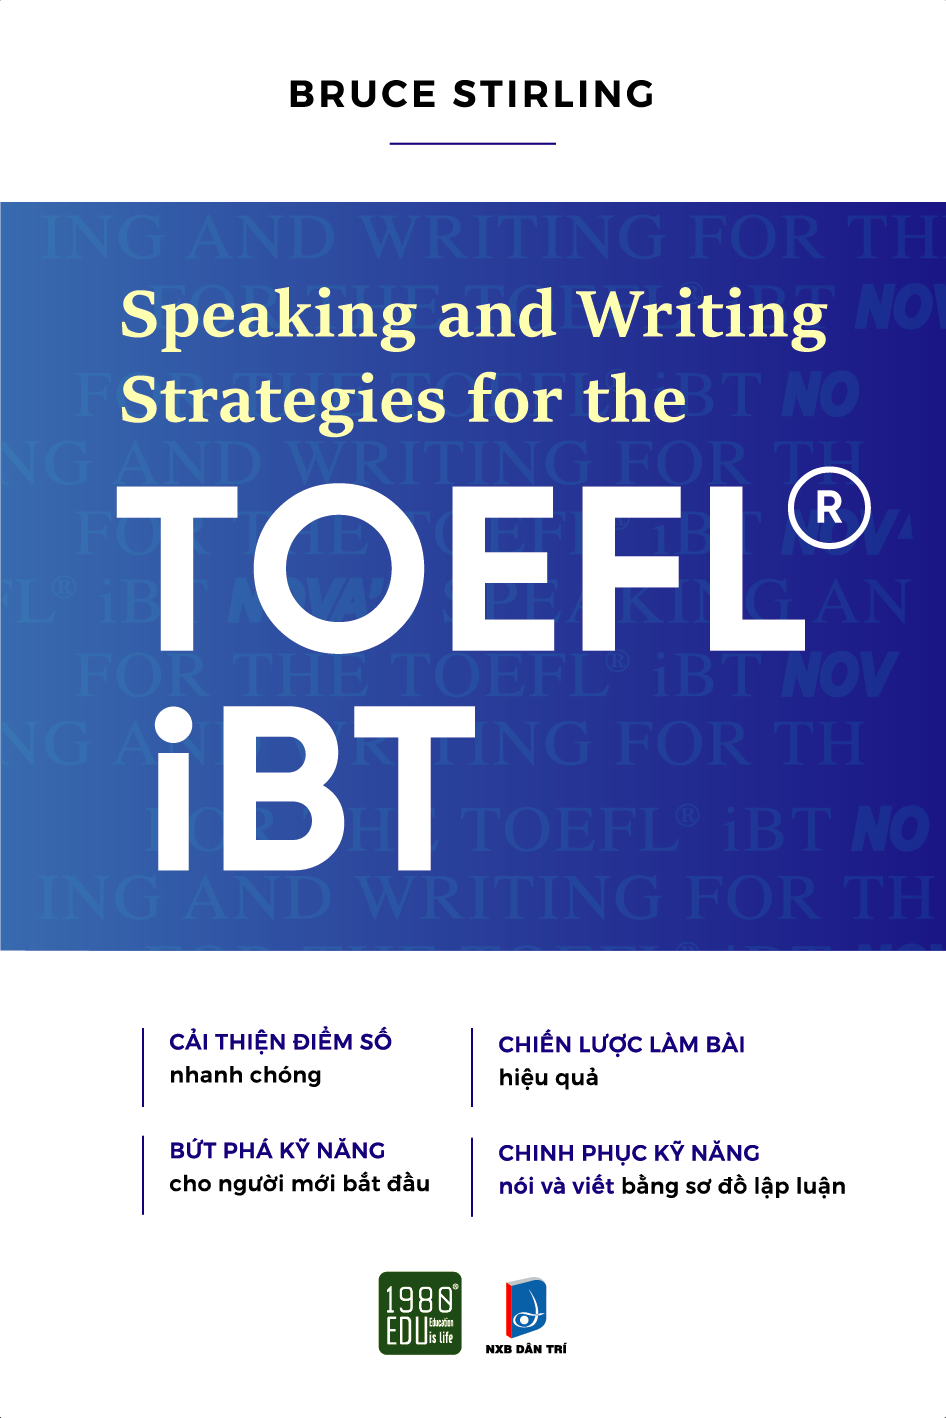 Speaking And Writing Strategies For The TOEFL - iBT PDF